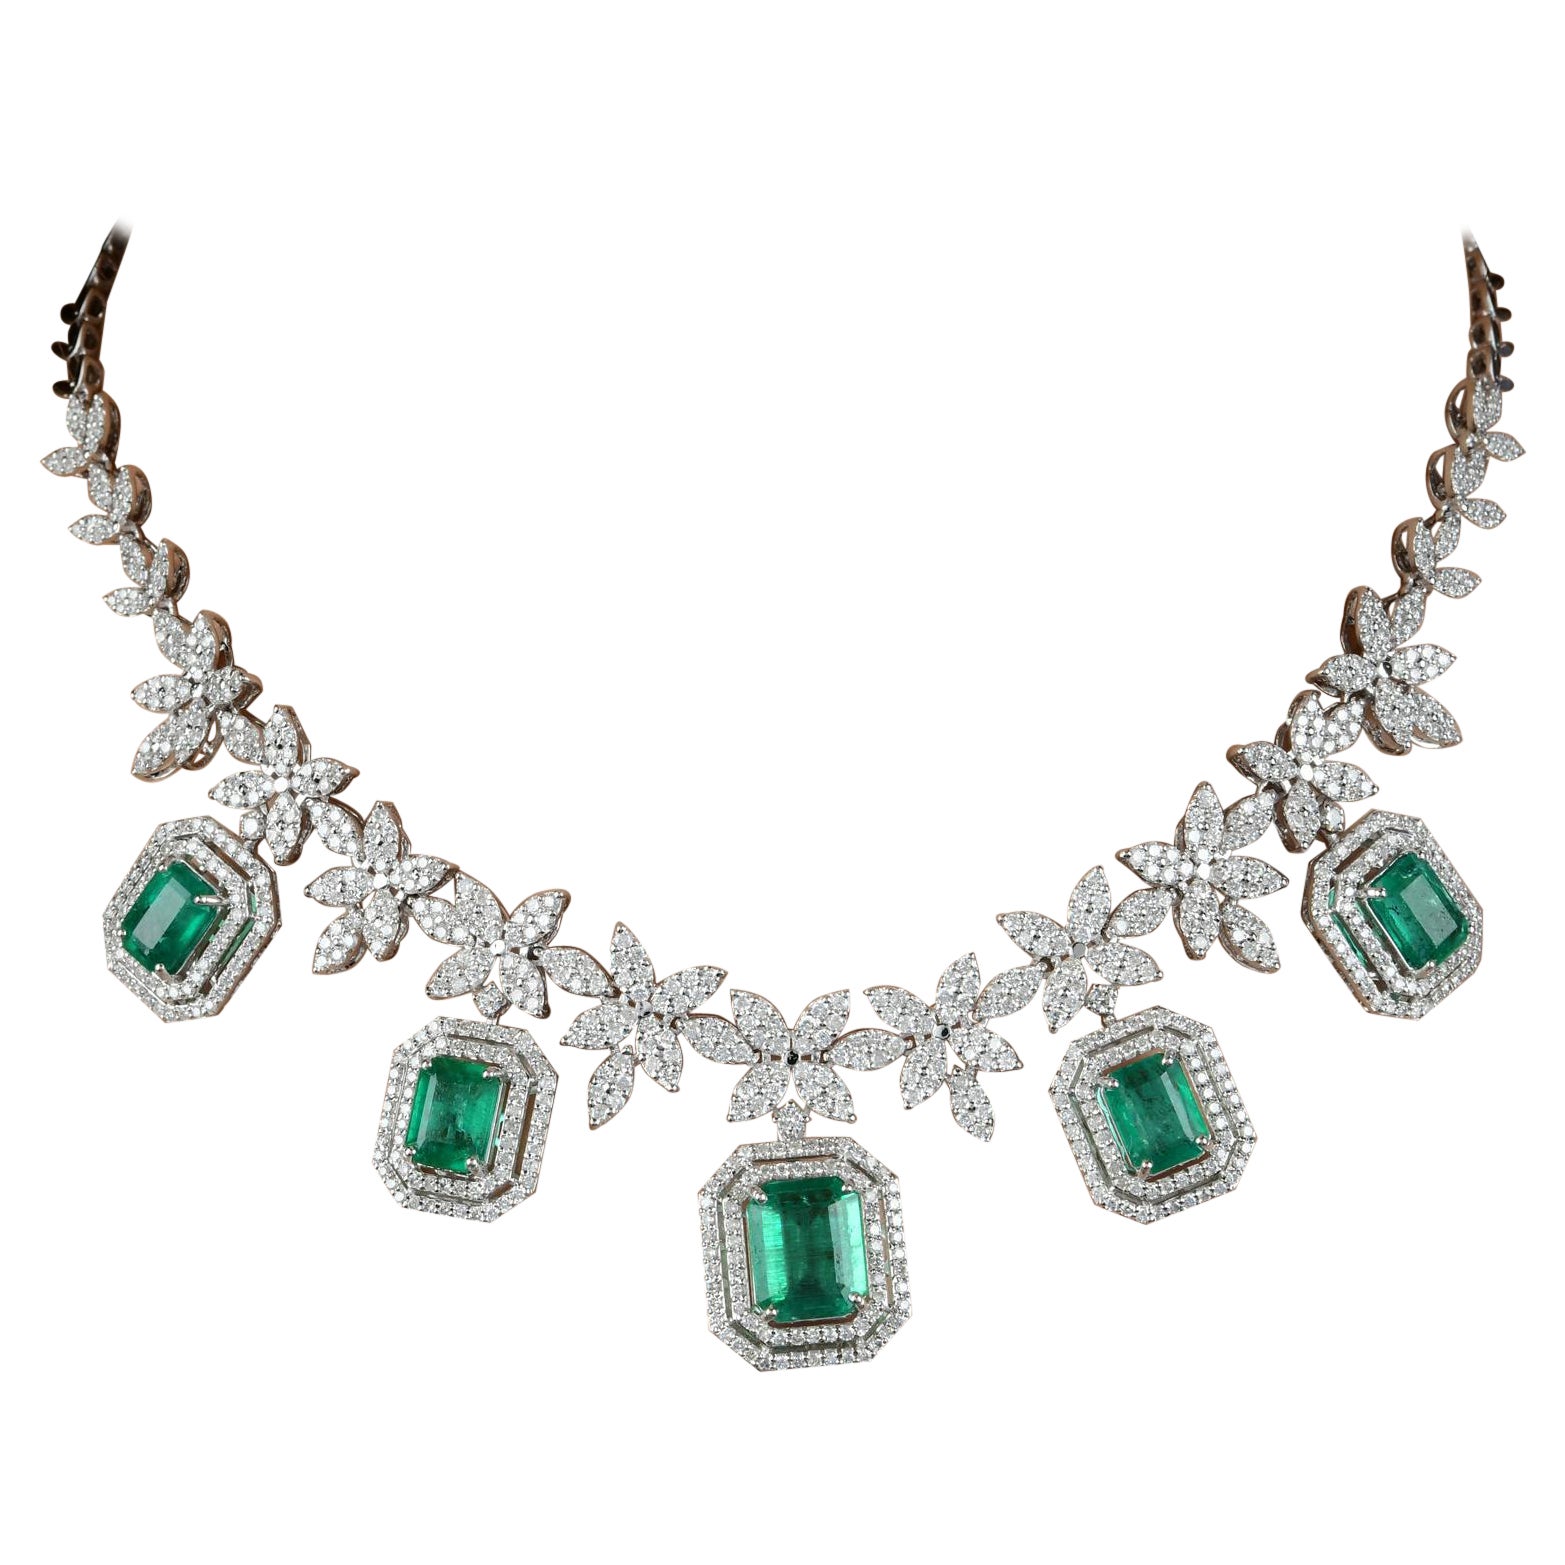 Make a celestial statement with this exquisite Zambian Emerald Gemstone Charm Multi Star Necklace. With its captivating emerald gemstones, diamond accents, and 18-karat white gold craftsmanship, it is a stunning addition to your jewelry collection